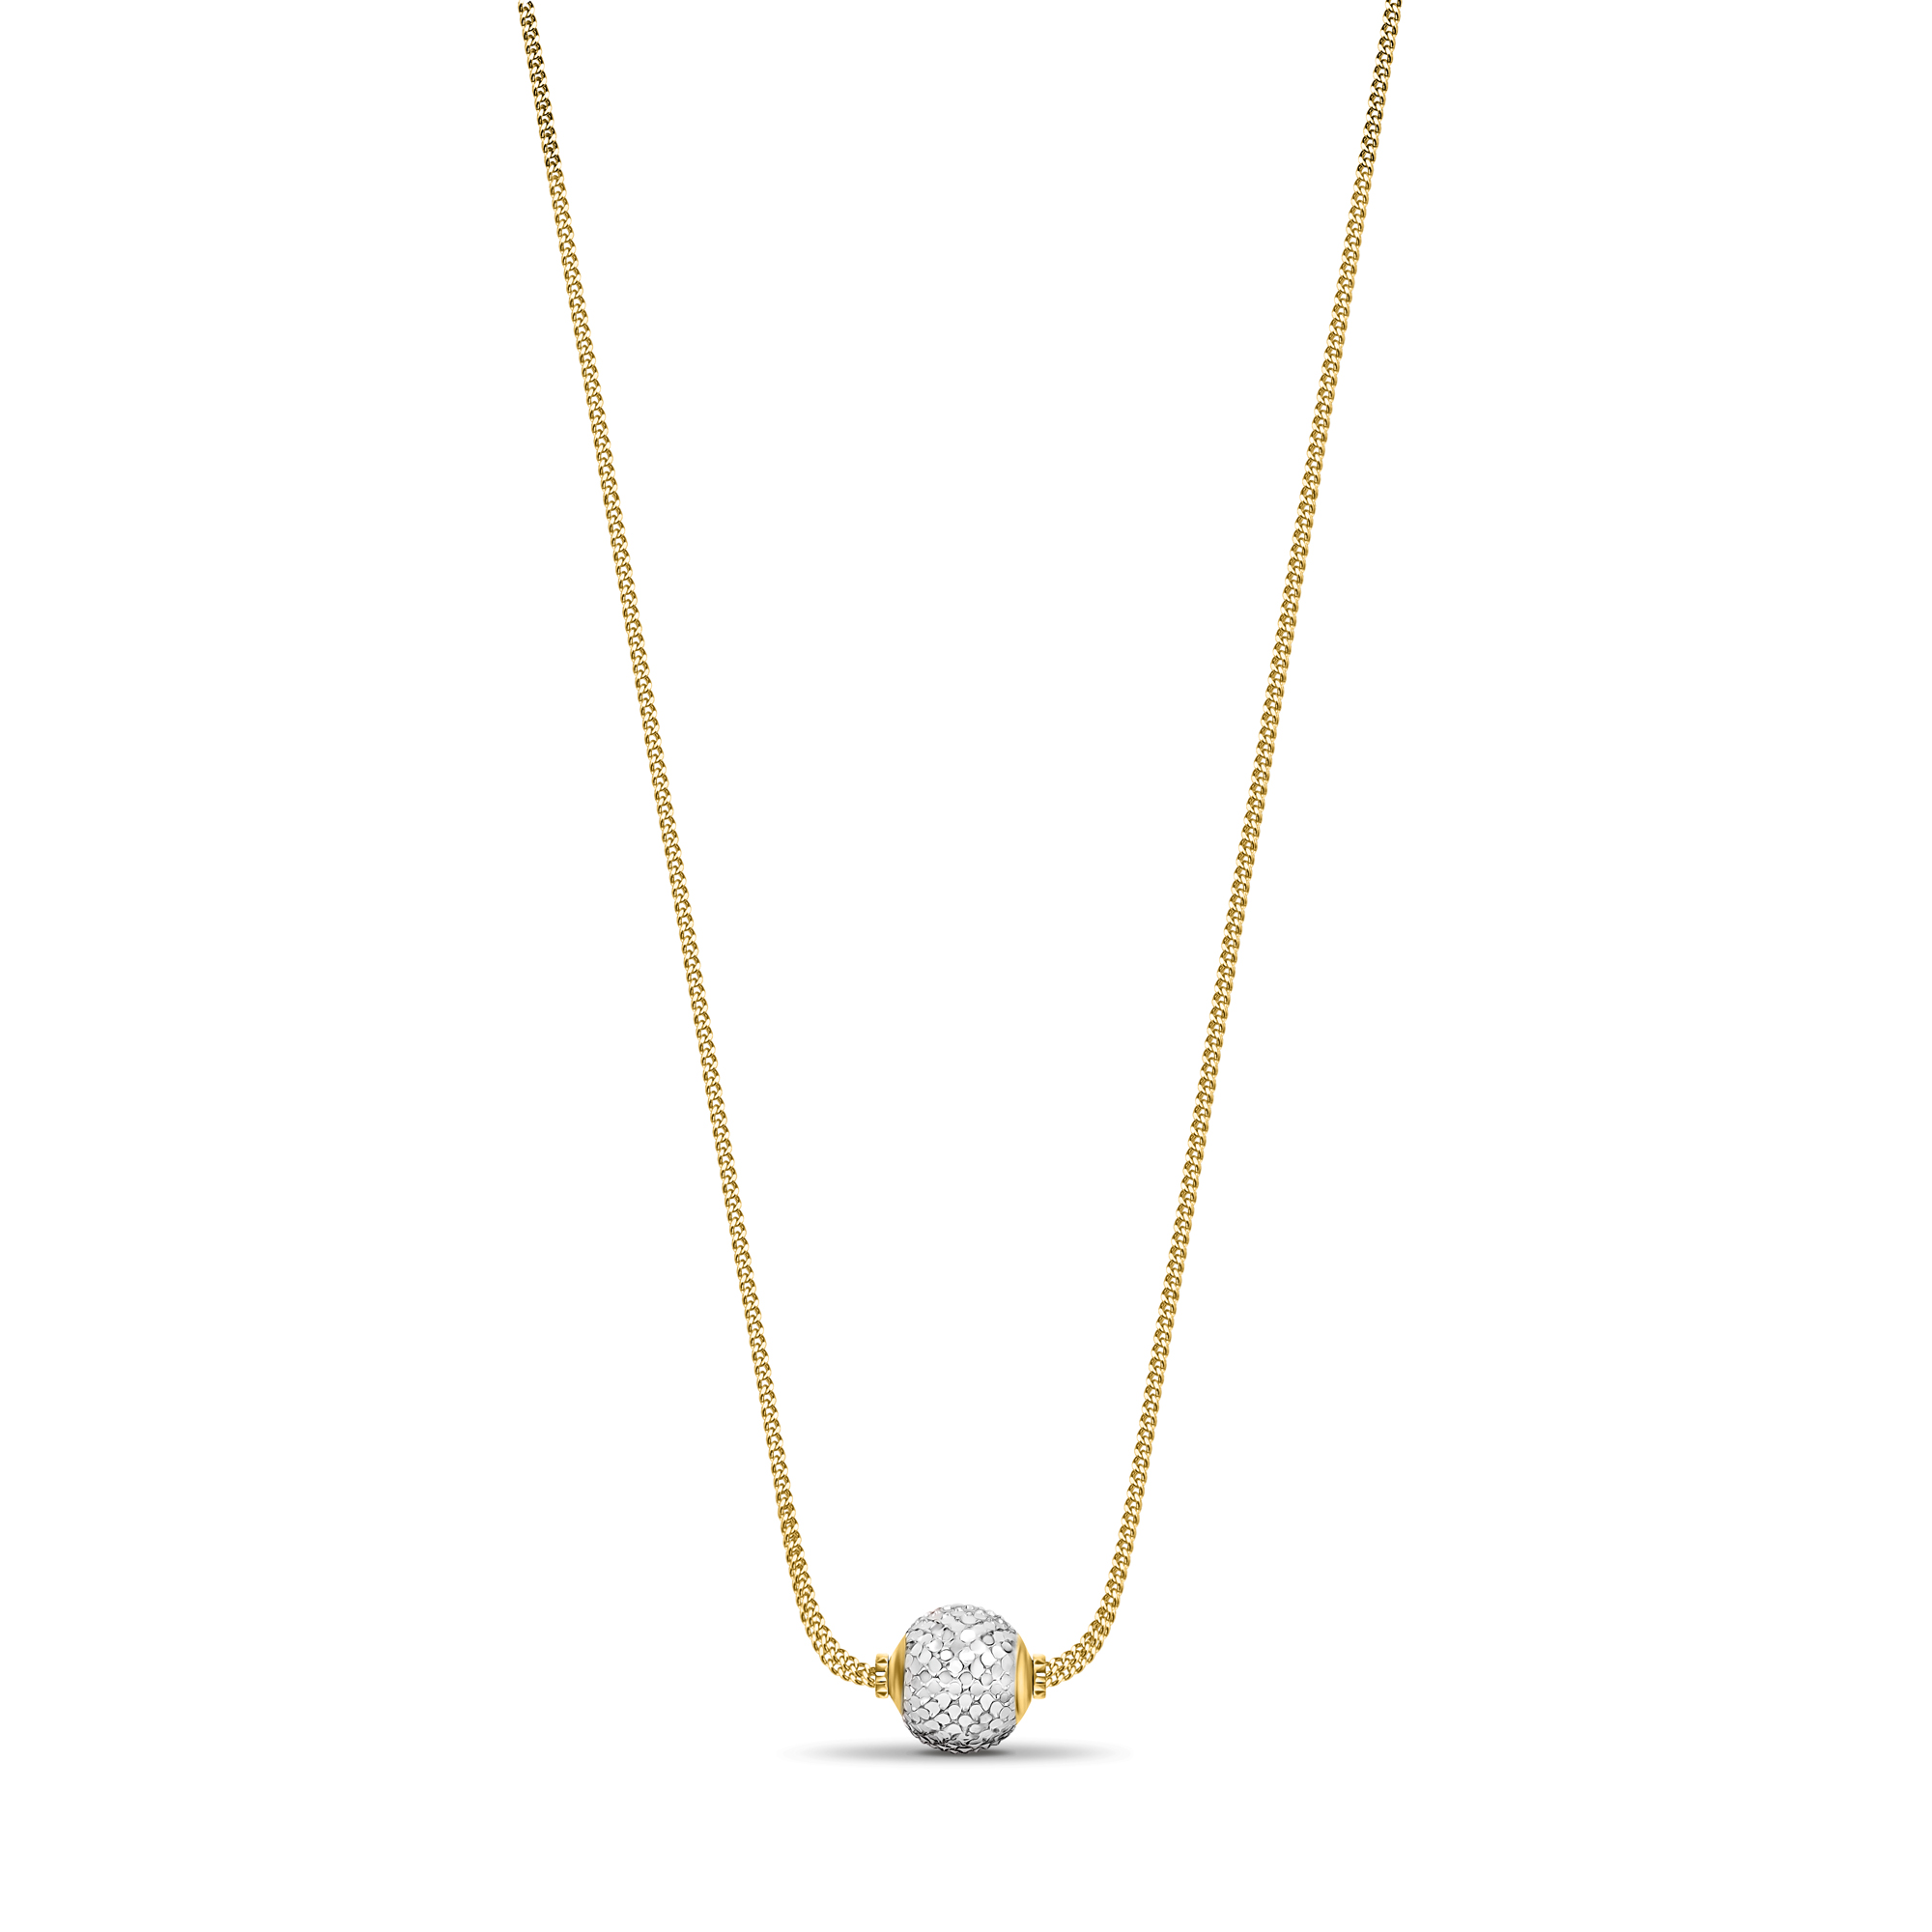 Lot - A diamond and 18k white gold ball pendant necklace